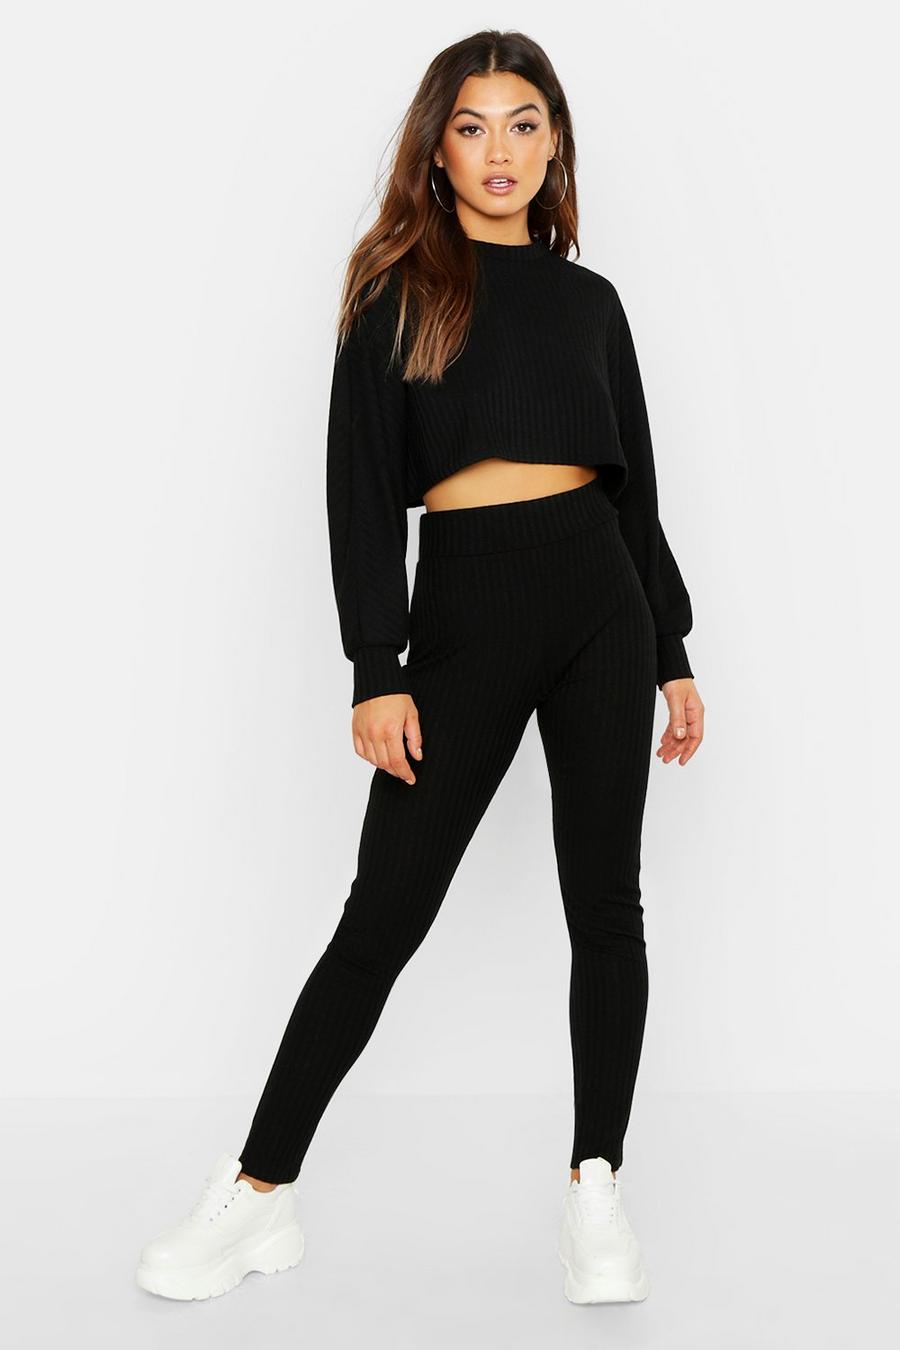 Black Rib Knitted Oversized Top And Legging Two-Piece Set image number 1